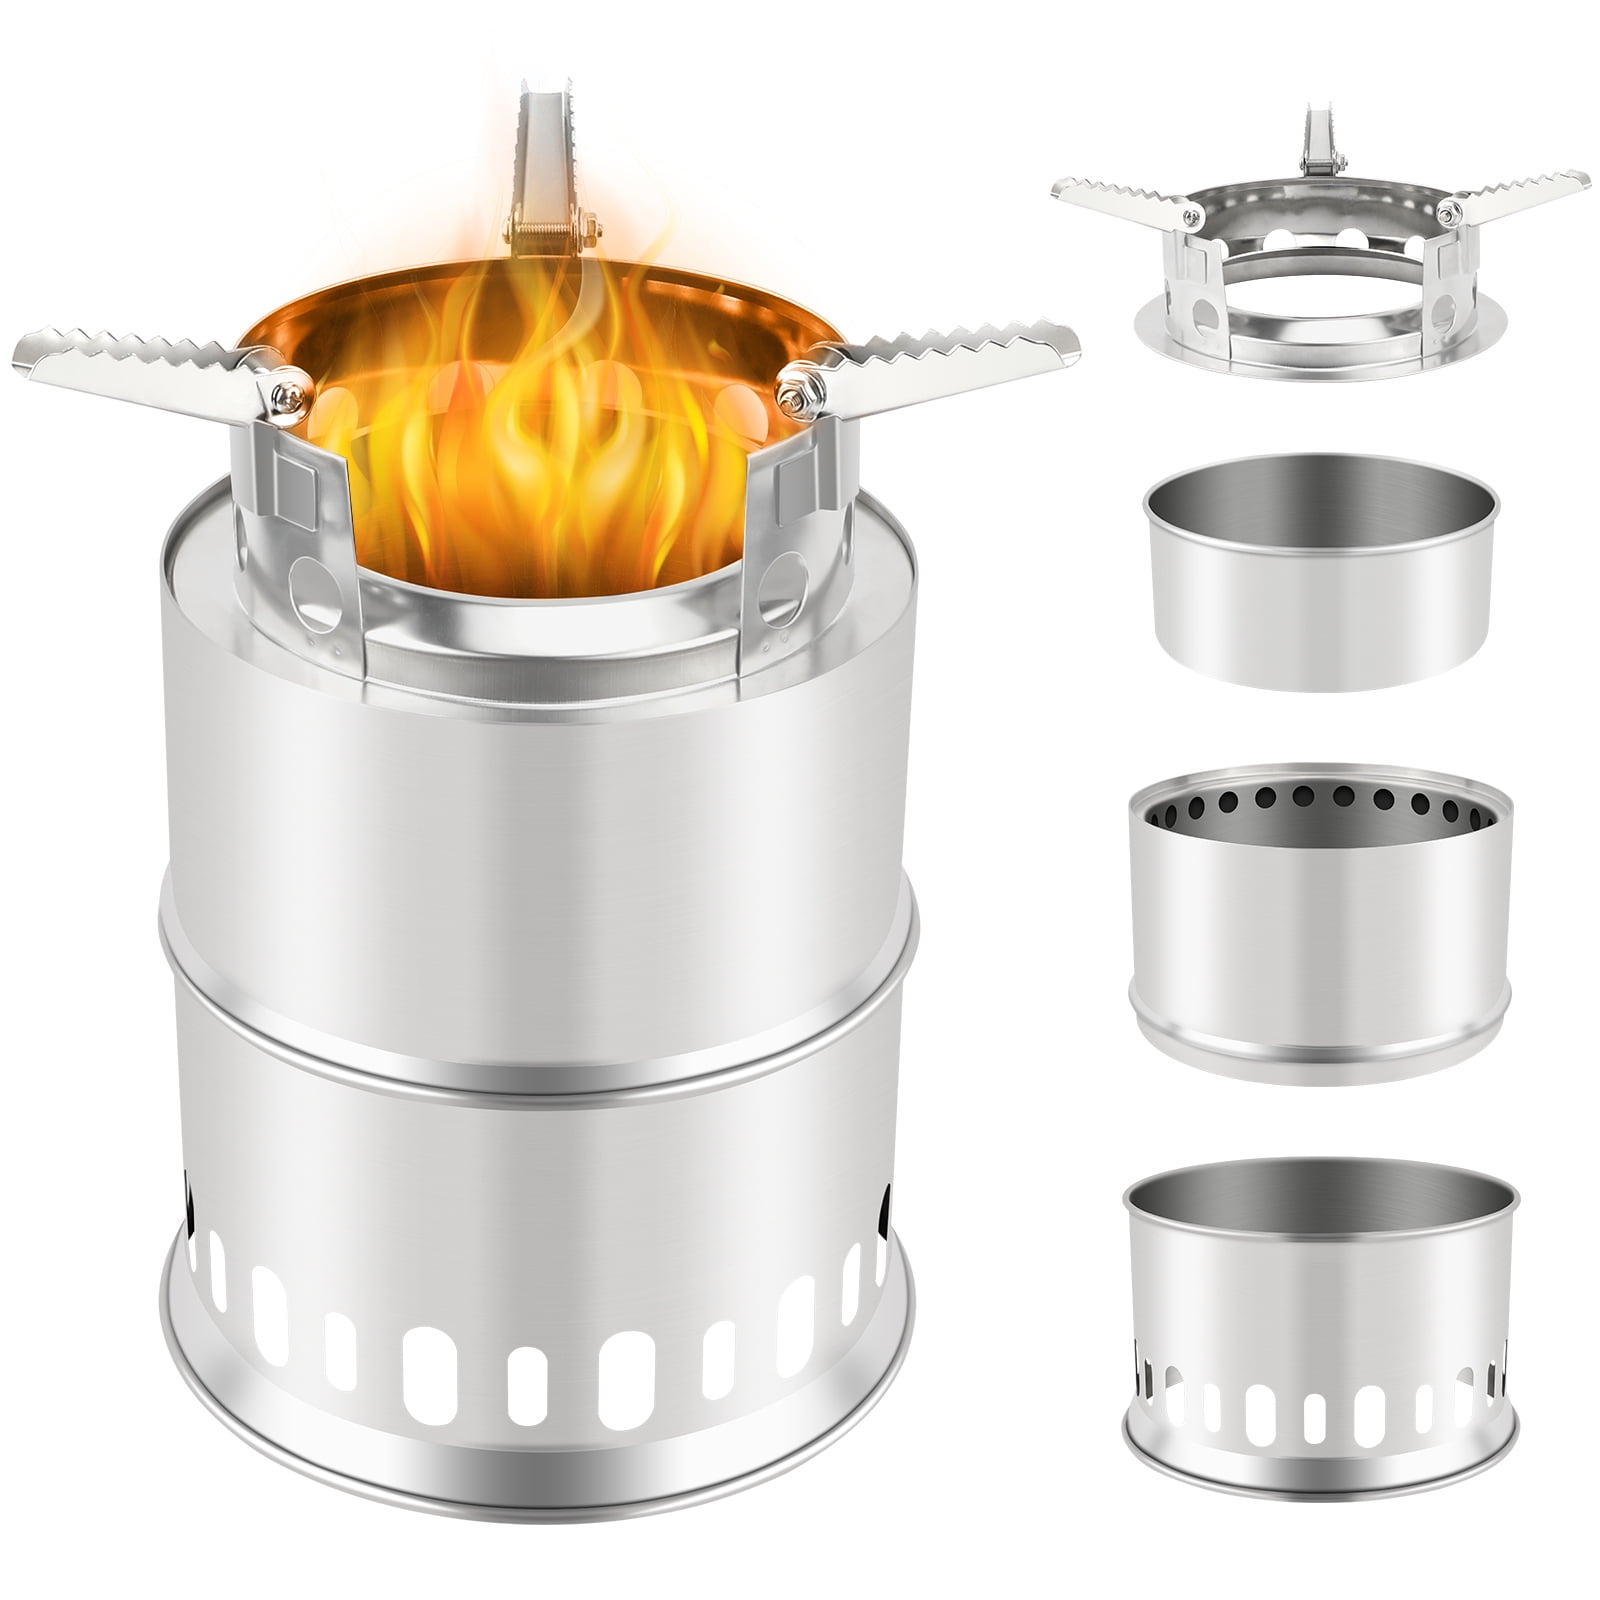 Top Light Weight Automatic Portable Foldable Wood Camping Stove